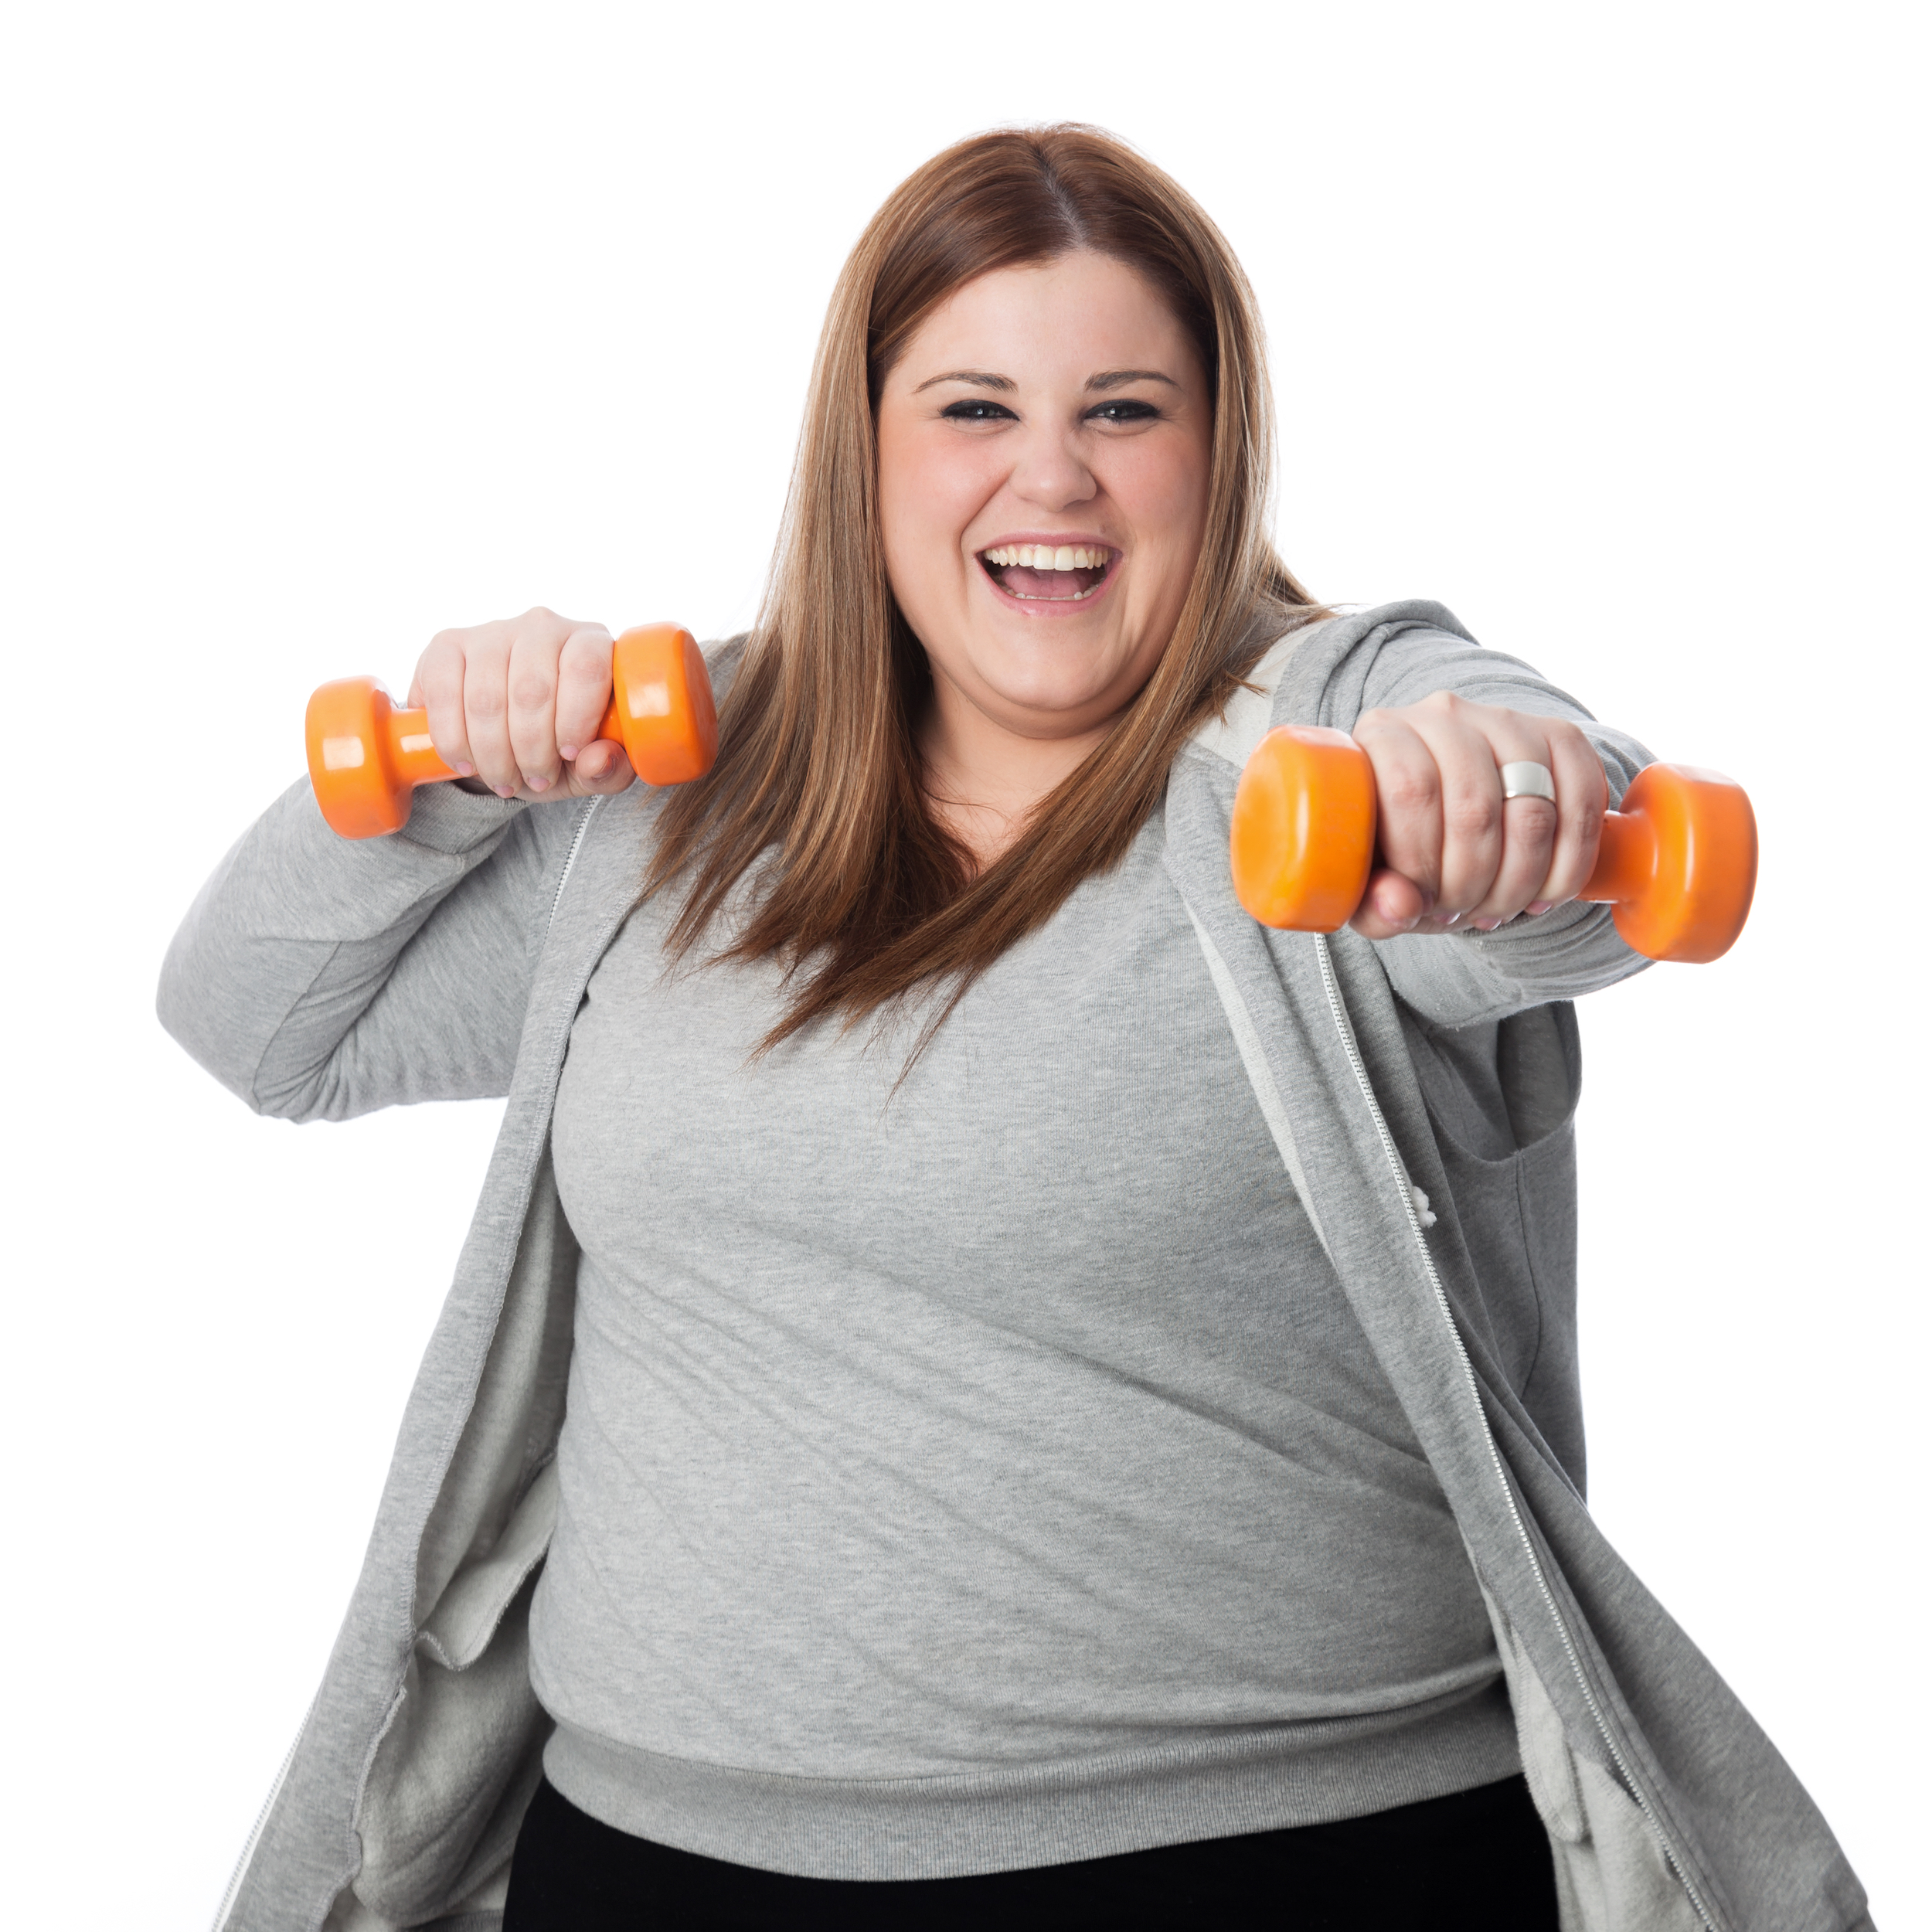 Woman exercising with dumbbells.